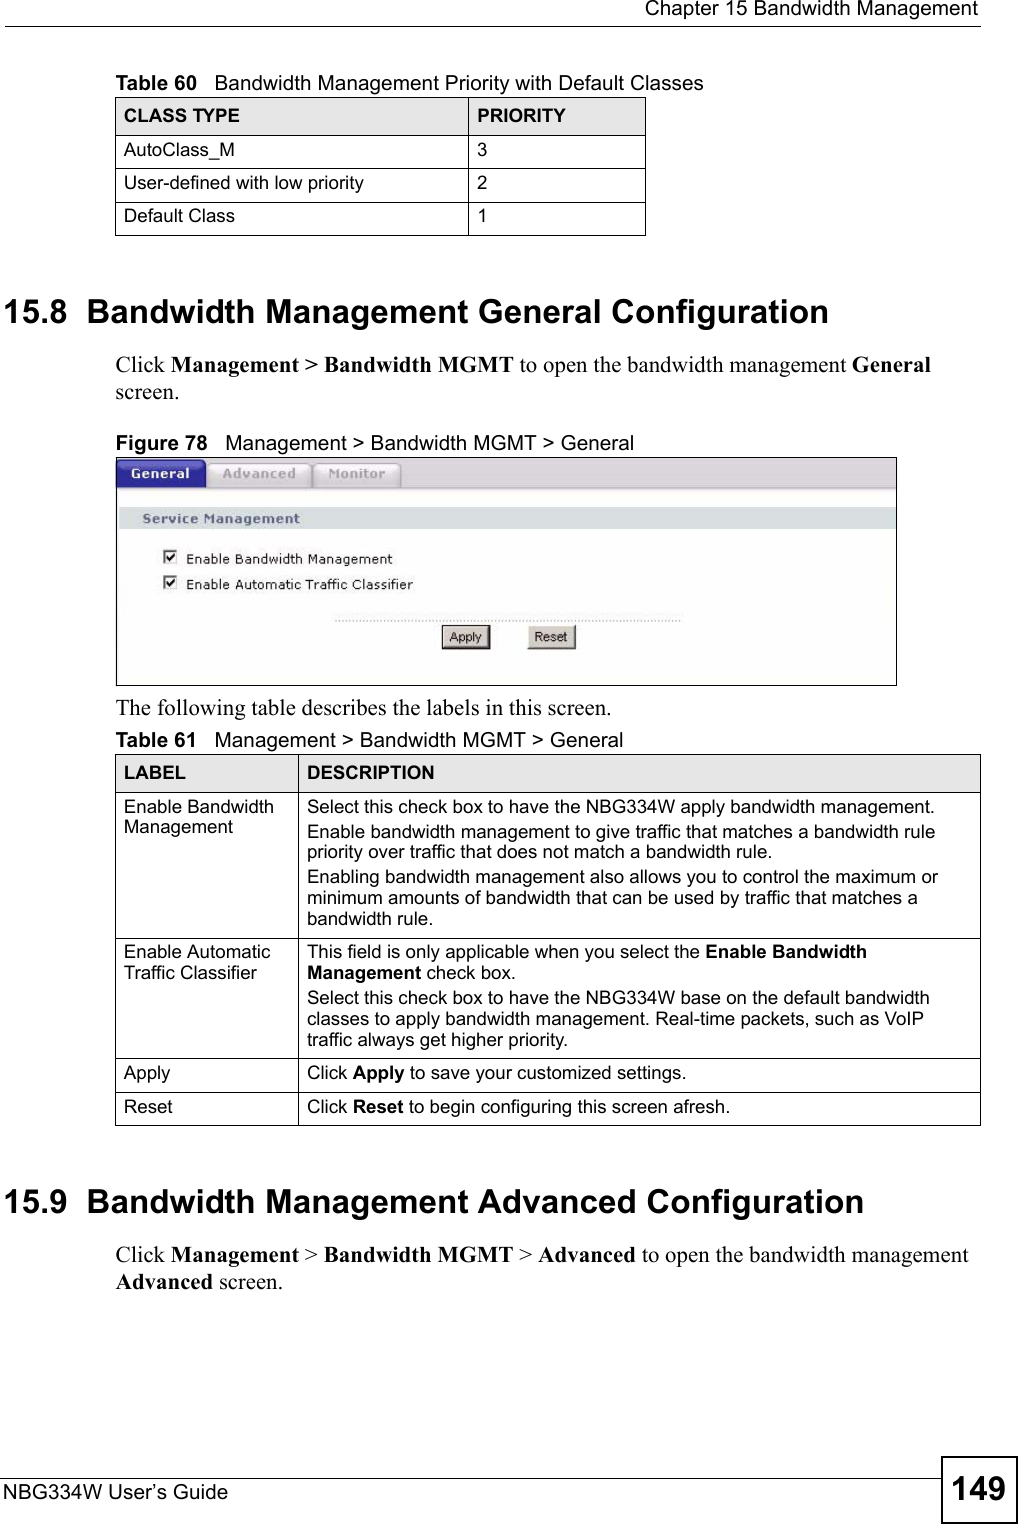  Chapter 15 Bandwidth ManagementNBG334W User’s Guide 14915.8  Bandwidth Management General Configuration Click Management &gt; Bandwidth MGMT to open the bandwidth management General screen.Figure 78   Management &gt; Bandwidth MGMT &gt; General   The following table describes the labels in this screen.15.9  Bandwidth Management Advanced Configuration Click Management &gt; Bandwidth MGMT &gt; Advanced to open the bandwidth management Advanced screen.AutoClass_M 3User-defined with low priority 2Default Class 1Table 60   Bandwidth Management Priority with Default ClassesCLASS TYPE PRIORITYTable 61   Management &gt; Bandwidth MGMT &gt; GeneralLABEL DESCRIPTIONEnable Bandwidth Management Select this check box to have the NBG334W apply bandwidth management. Enable bandwidth management to give traffic that matches a bandwidth rule priority over traffic that does not match a bandwidth rule. Enabling bandwidth management also allows you to control the maximum or minimum amounts of bandwidth that can be used by traffic that matches a bandwidth rule. Enable Automatic Traffic Classifier This field is only applicable when you select the Enable Bandwidth Management check box.Select this check box to have the NBG334W base on the default bandwidth classes to apply bandwidth management. Real-time packets, such as VoIP traffic always get higher priority.Apply Click Apply to save your customized settings.Reset Click Reset to begin configuring this screen afresh.